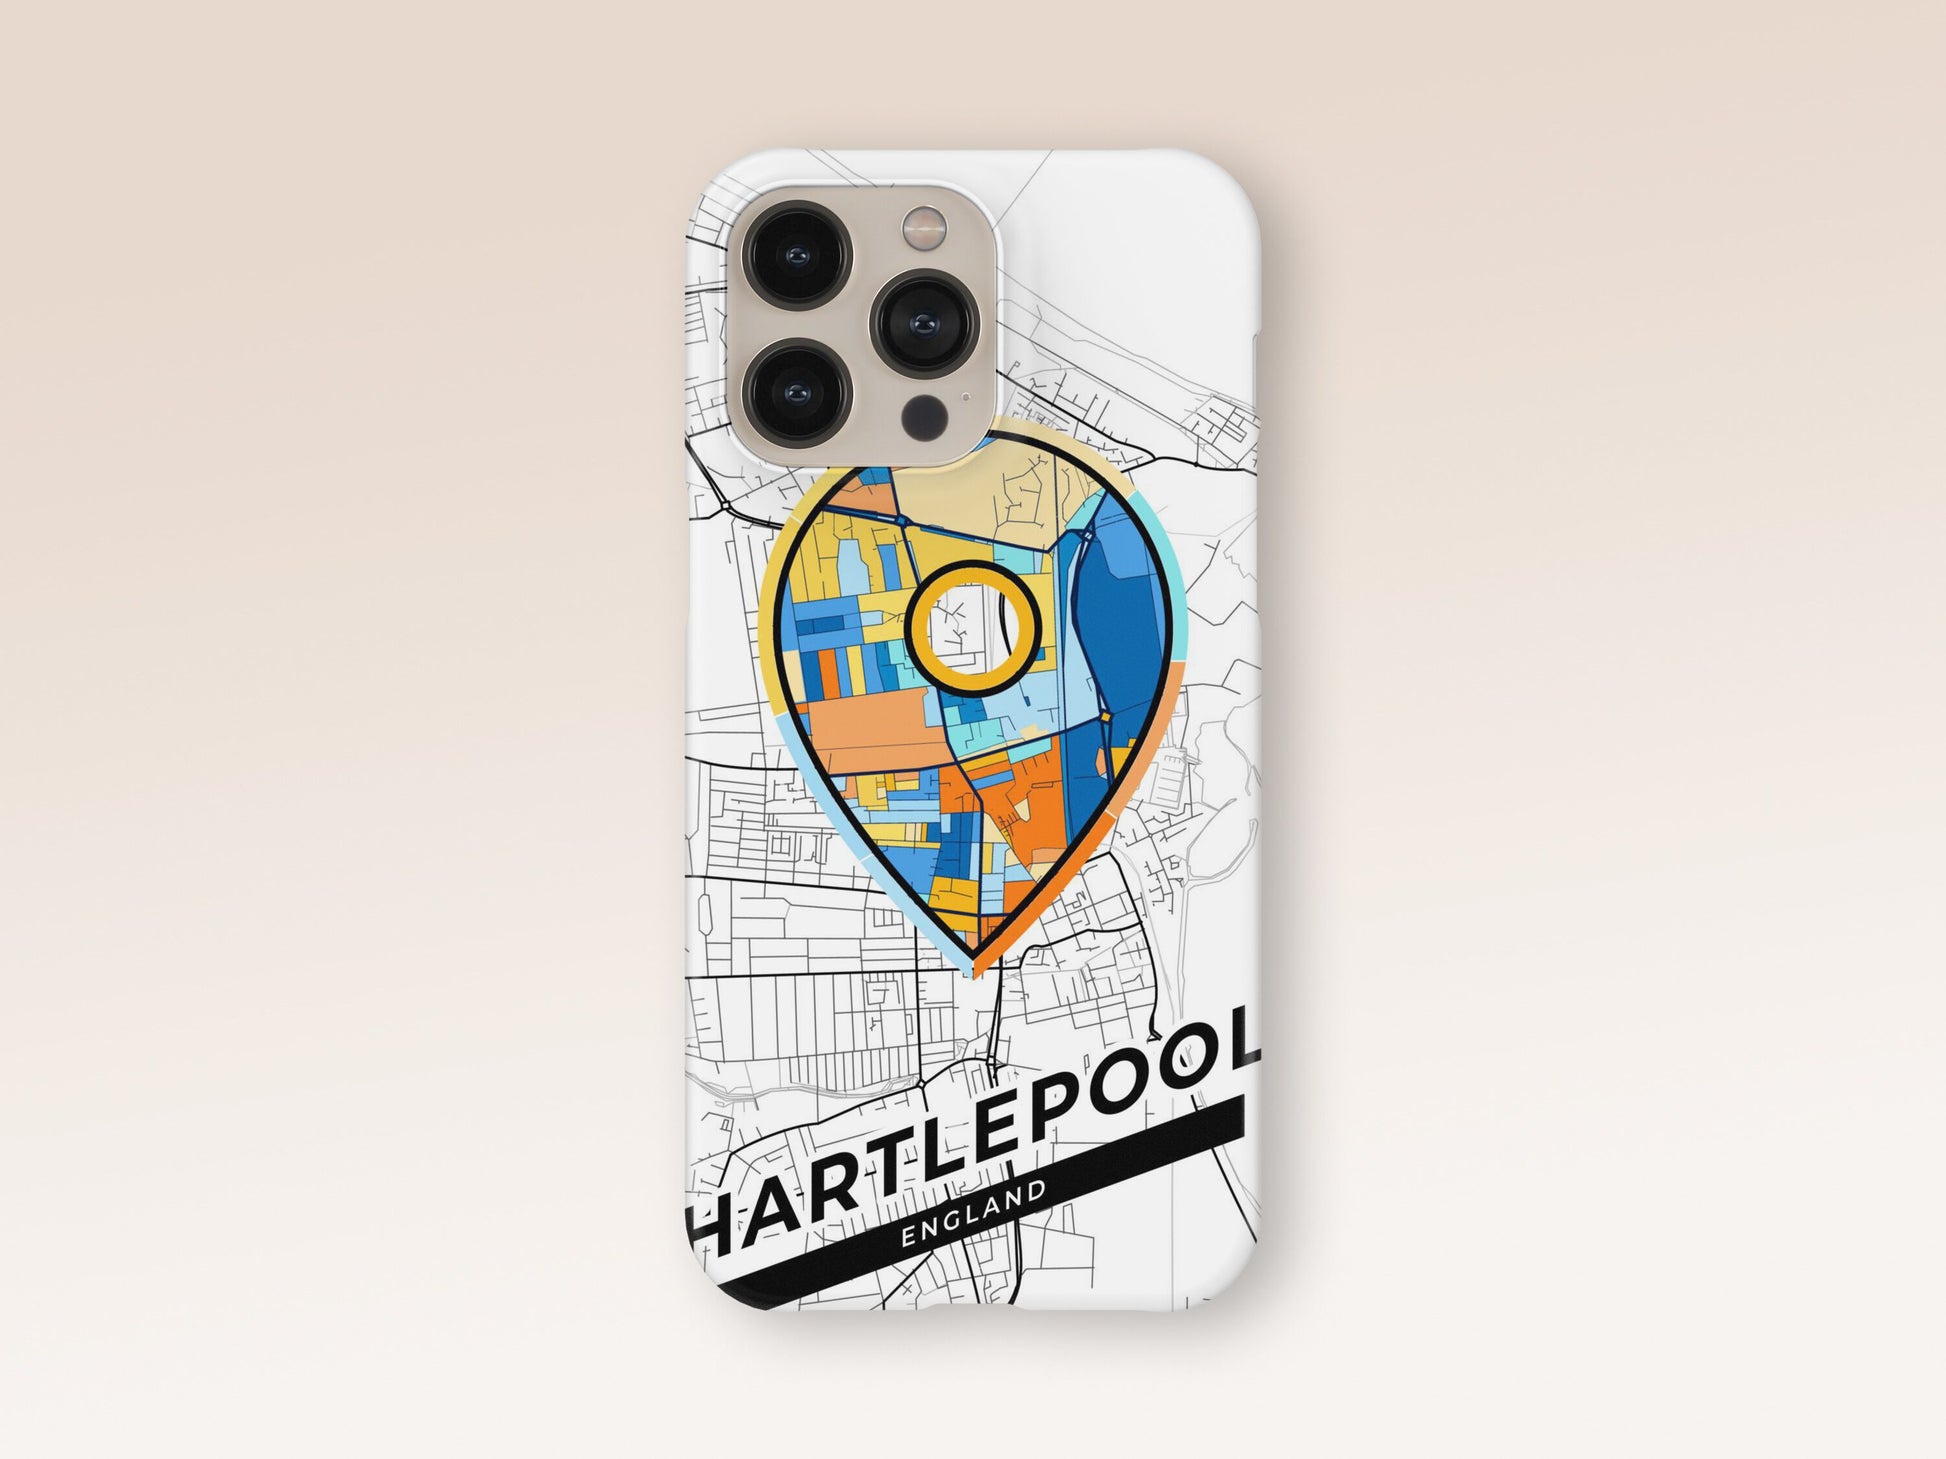 Hartlepool England slim phone case with colorful icon. Birthday, wedding or housewarming gift. Couple match cases. 1